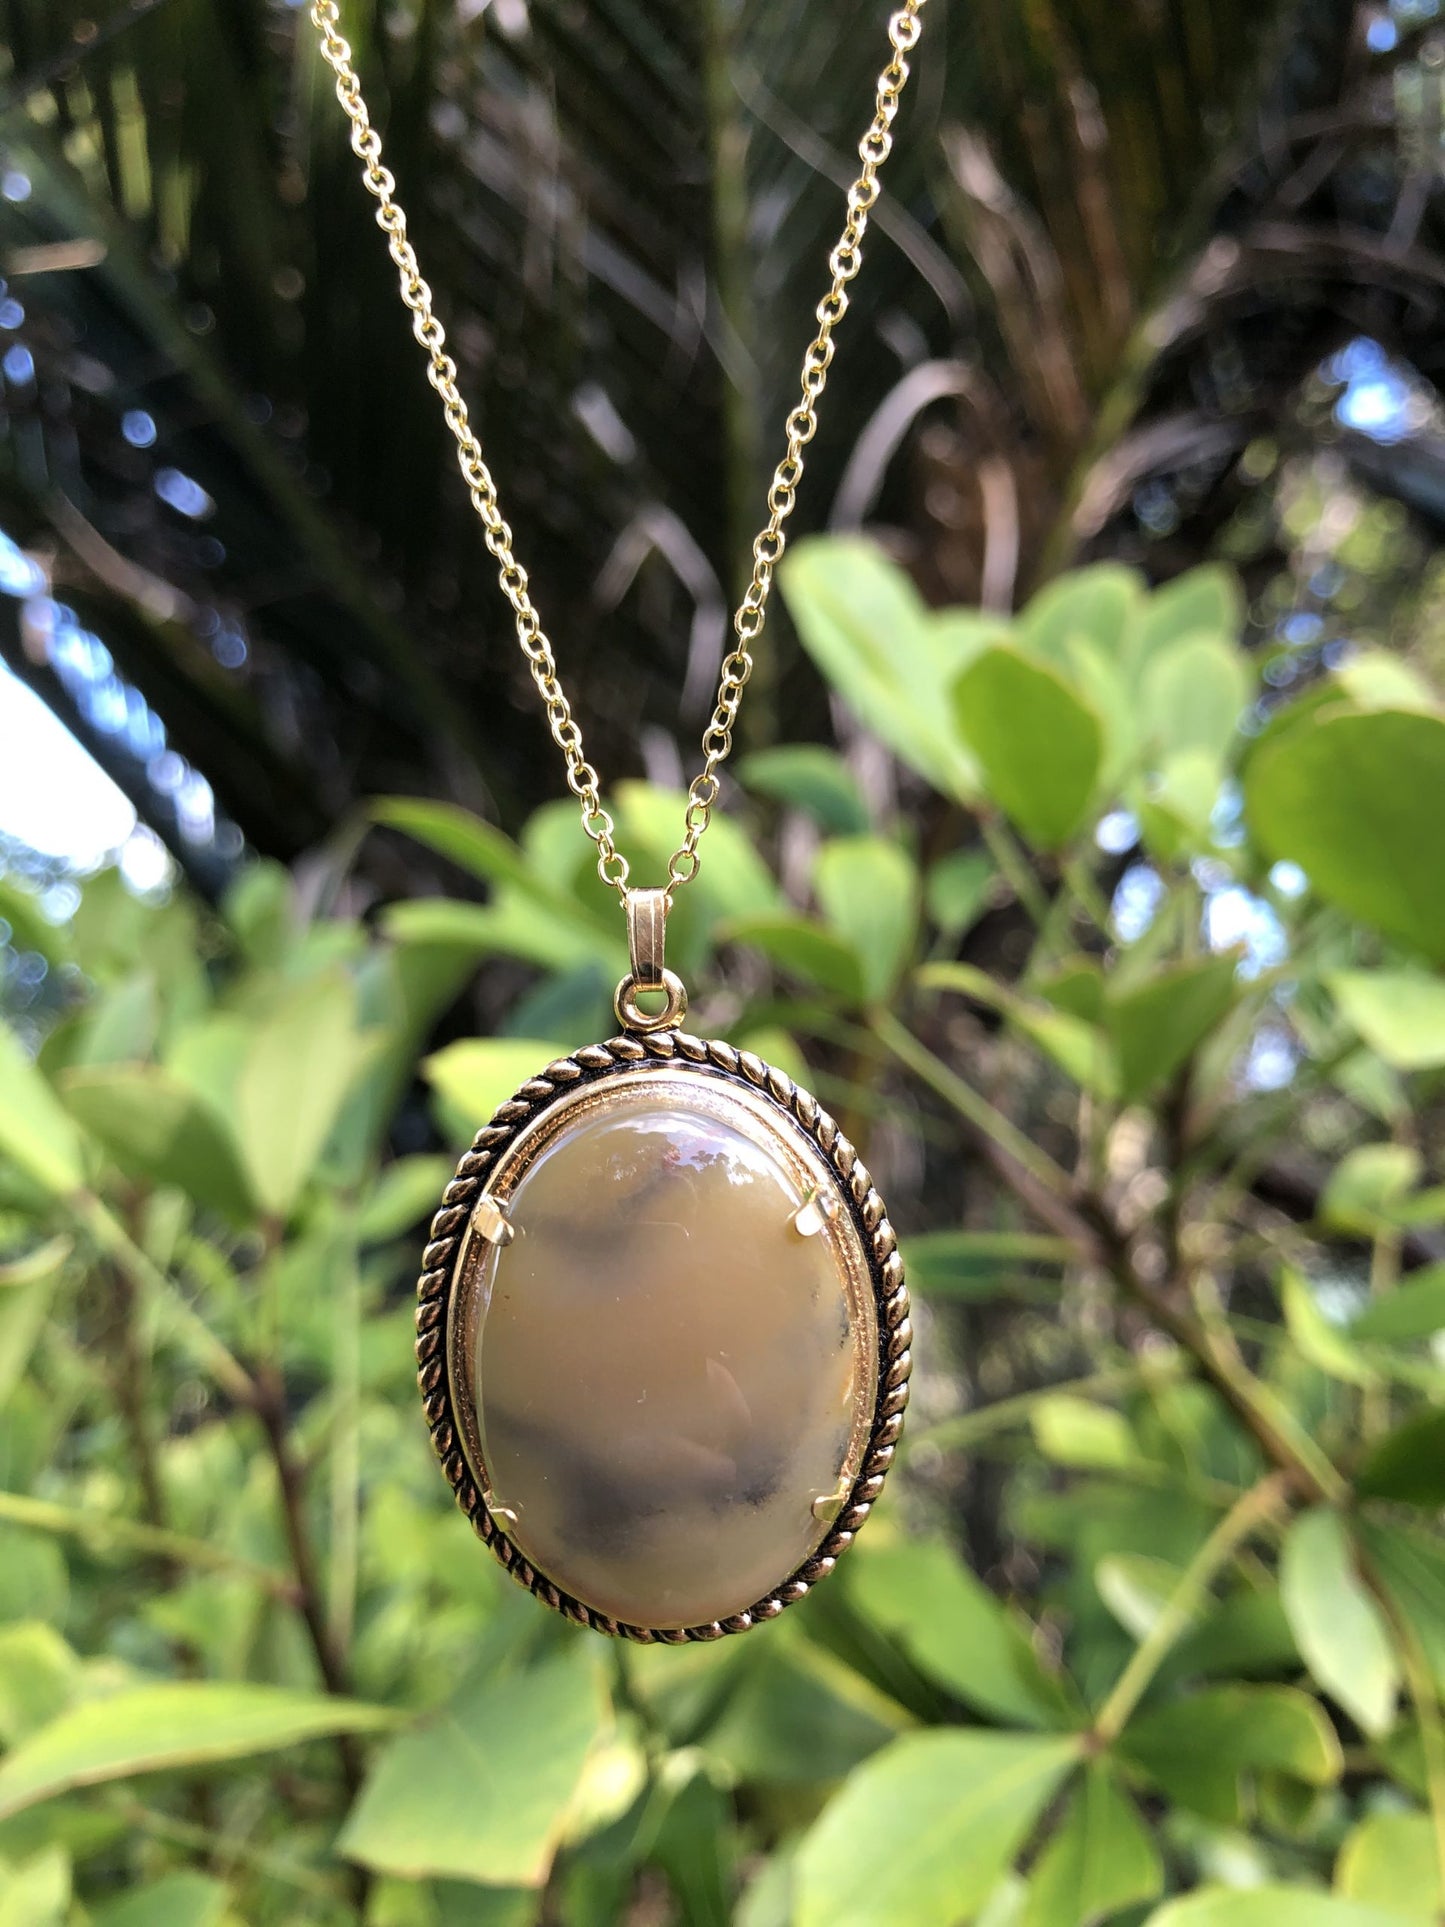 Necklace with natural petrified wood from Coromandel, New Zealand with subtle brown and tan tones along the grain lines, hand polished to a 30x22mm cabochon and set in a gold plated setting with 19 inch chain.